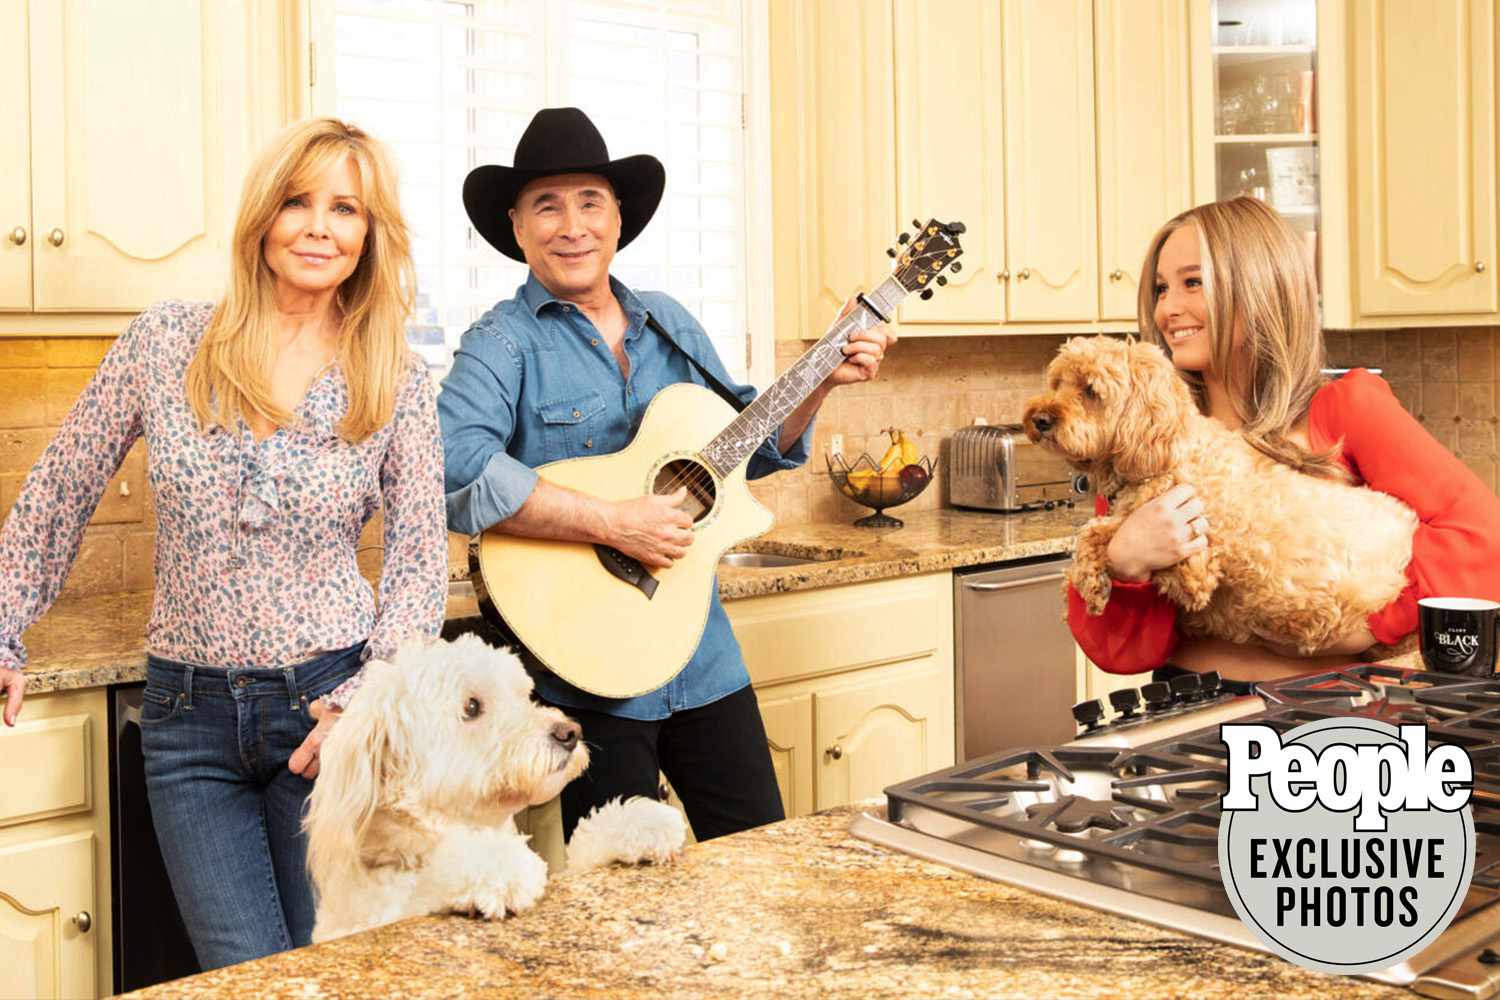 how many children does clint black have